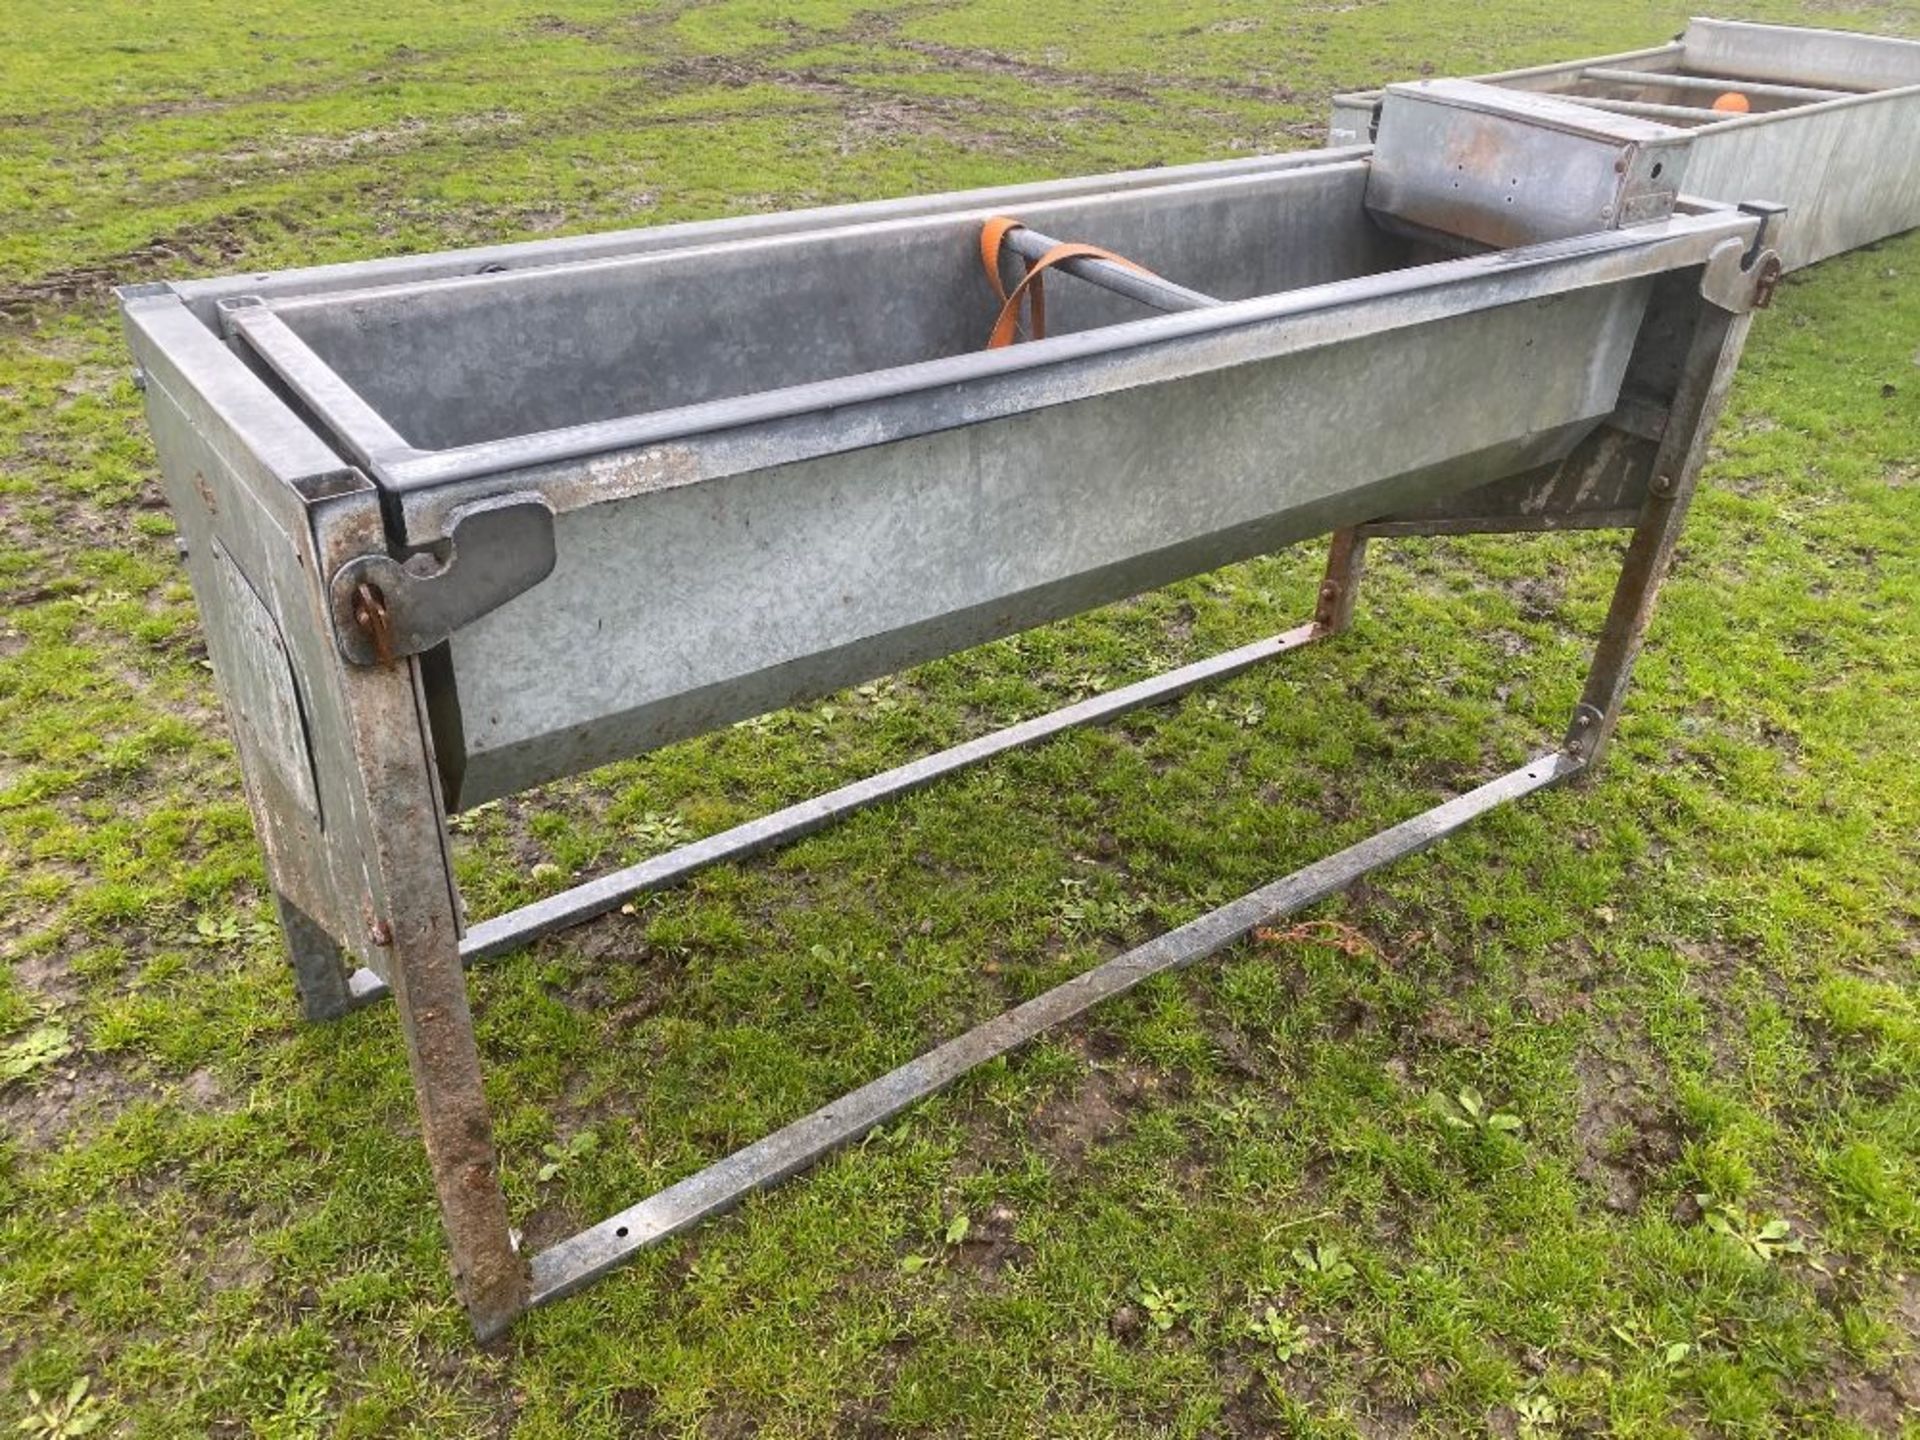 IAE roll over water trough. Stored near Goring Heath, Reading. No VAT on this item.